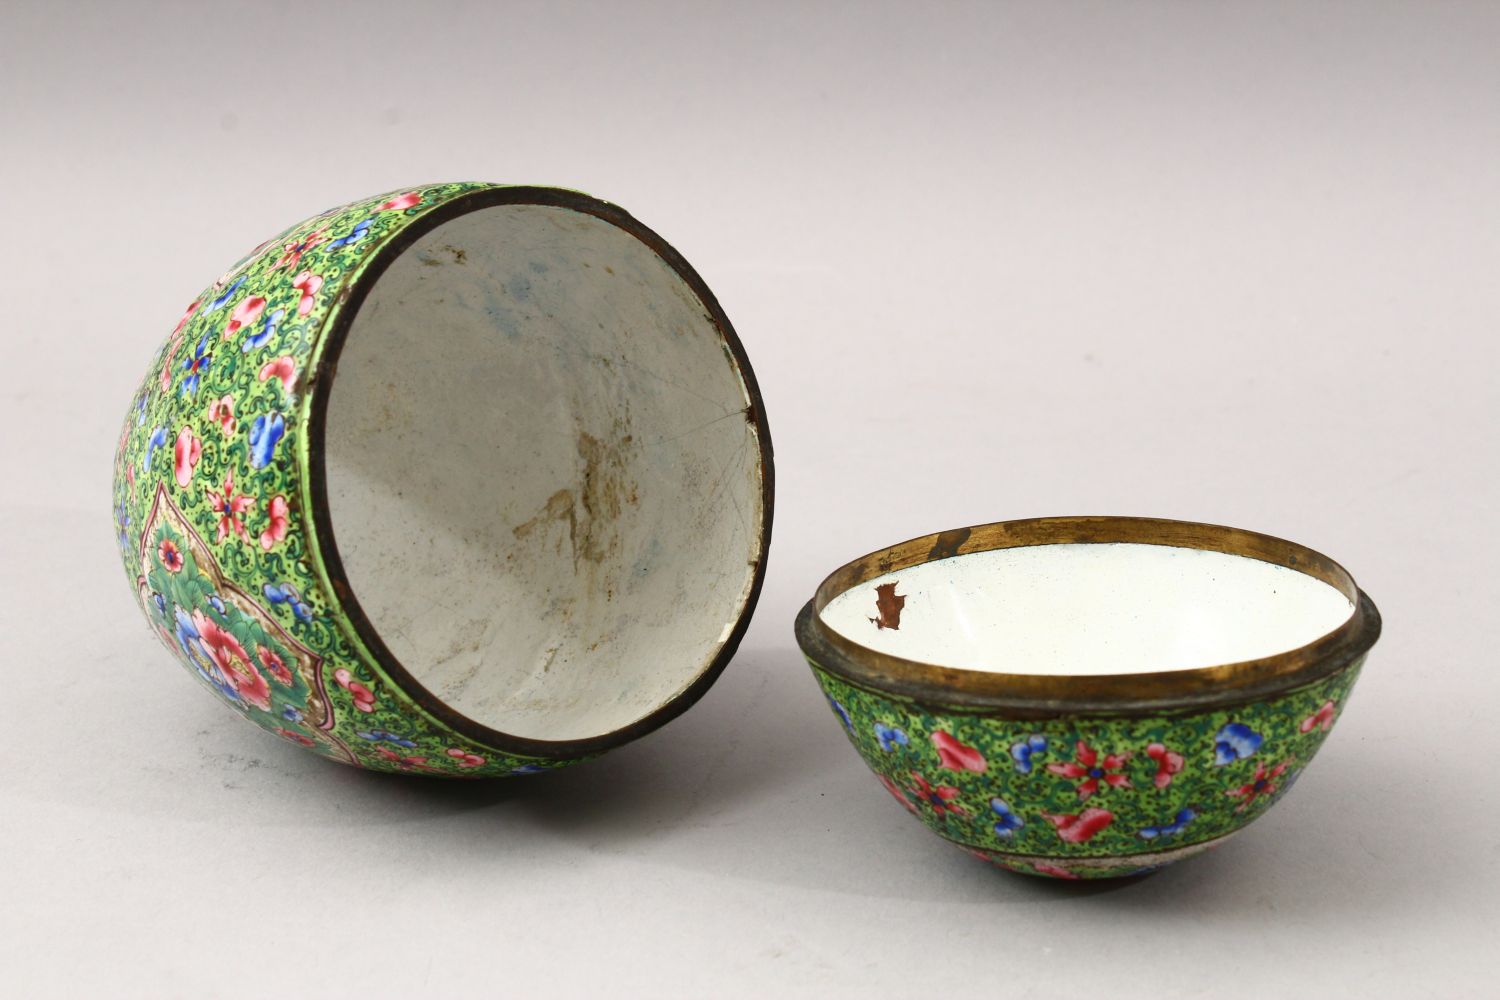 A GOOD 19TH CENTURY CHINESE CANTON ENAMEL EGG, the egg with a green ground with floral panel - Image 2 of 4